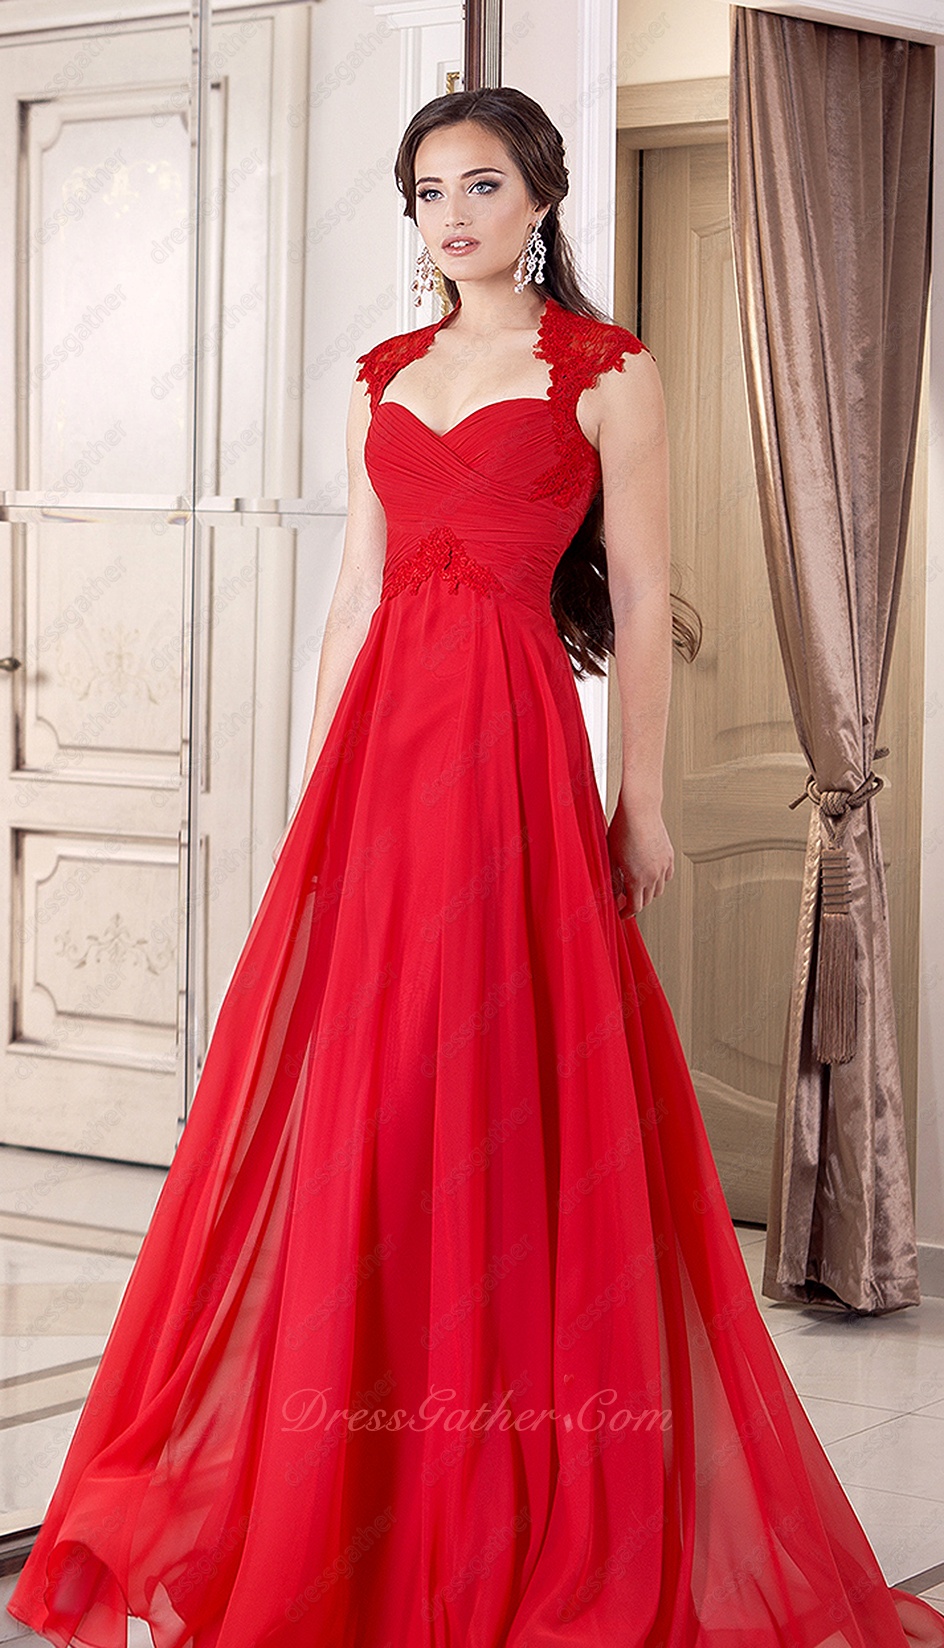 Memorable Cap Sleeves Empire Waist Lady Red Svelte Dress For Engagement - Click Image to Close